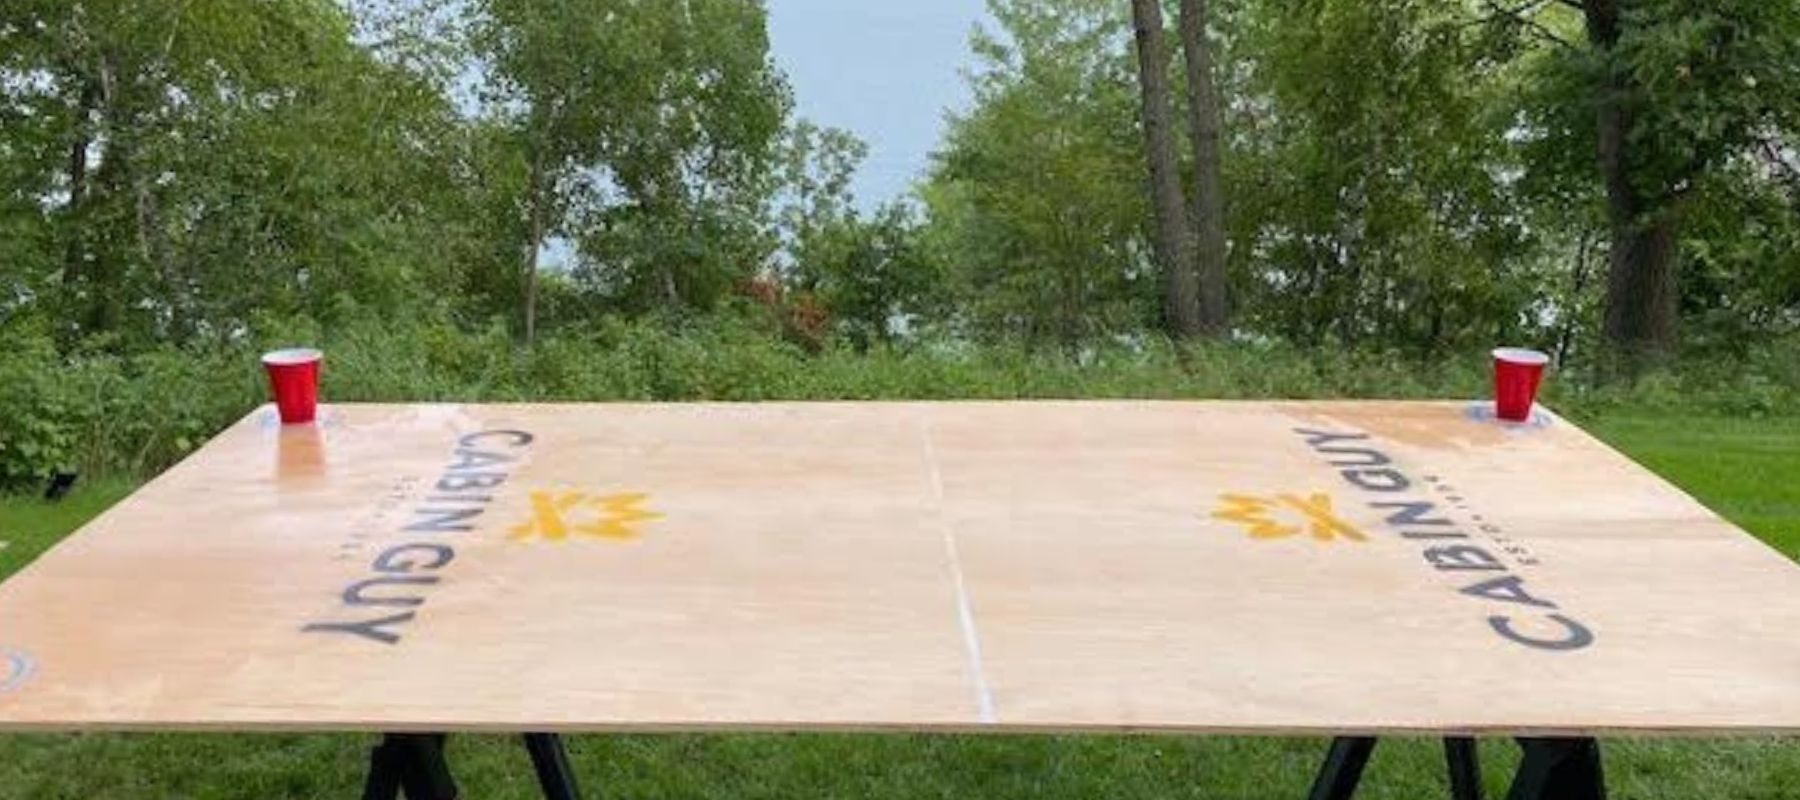 Finished sota beer die table at the Minnesota cabin